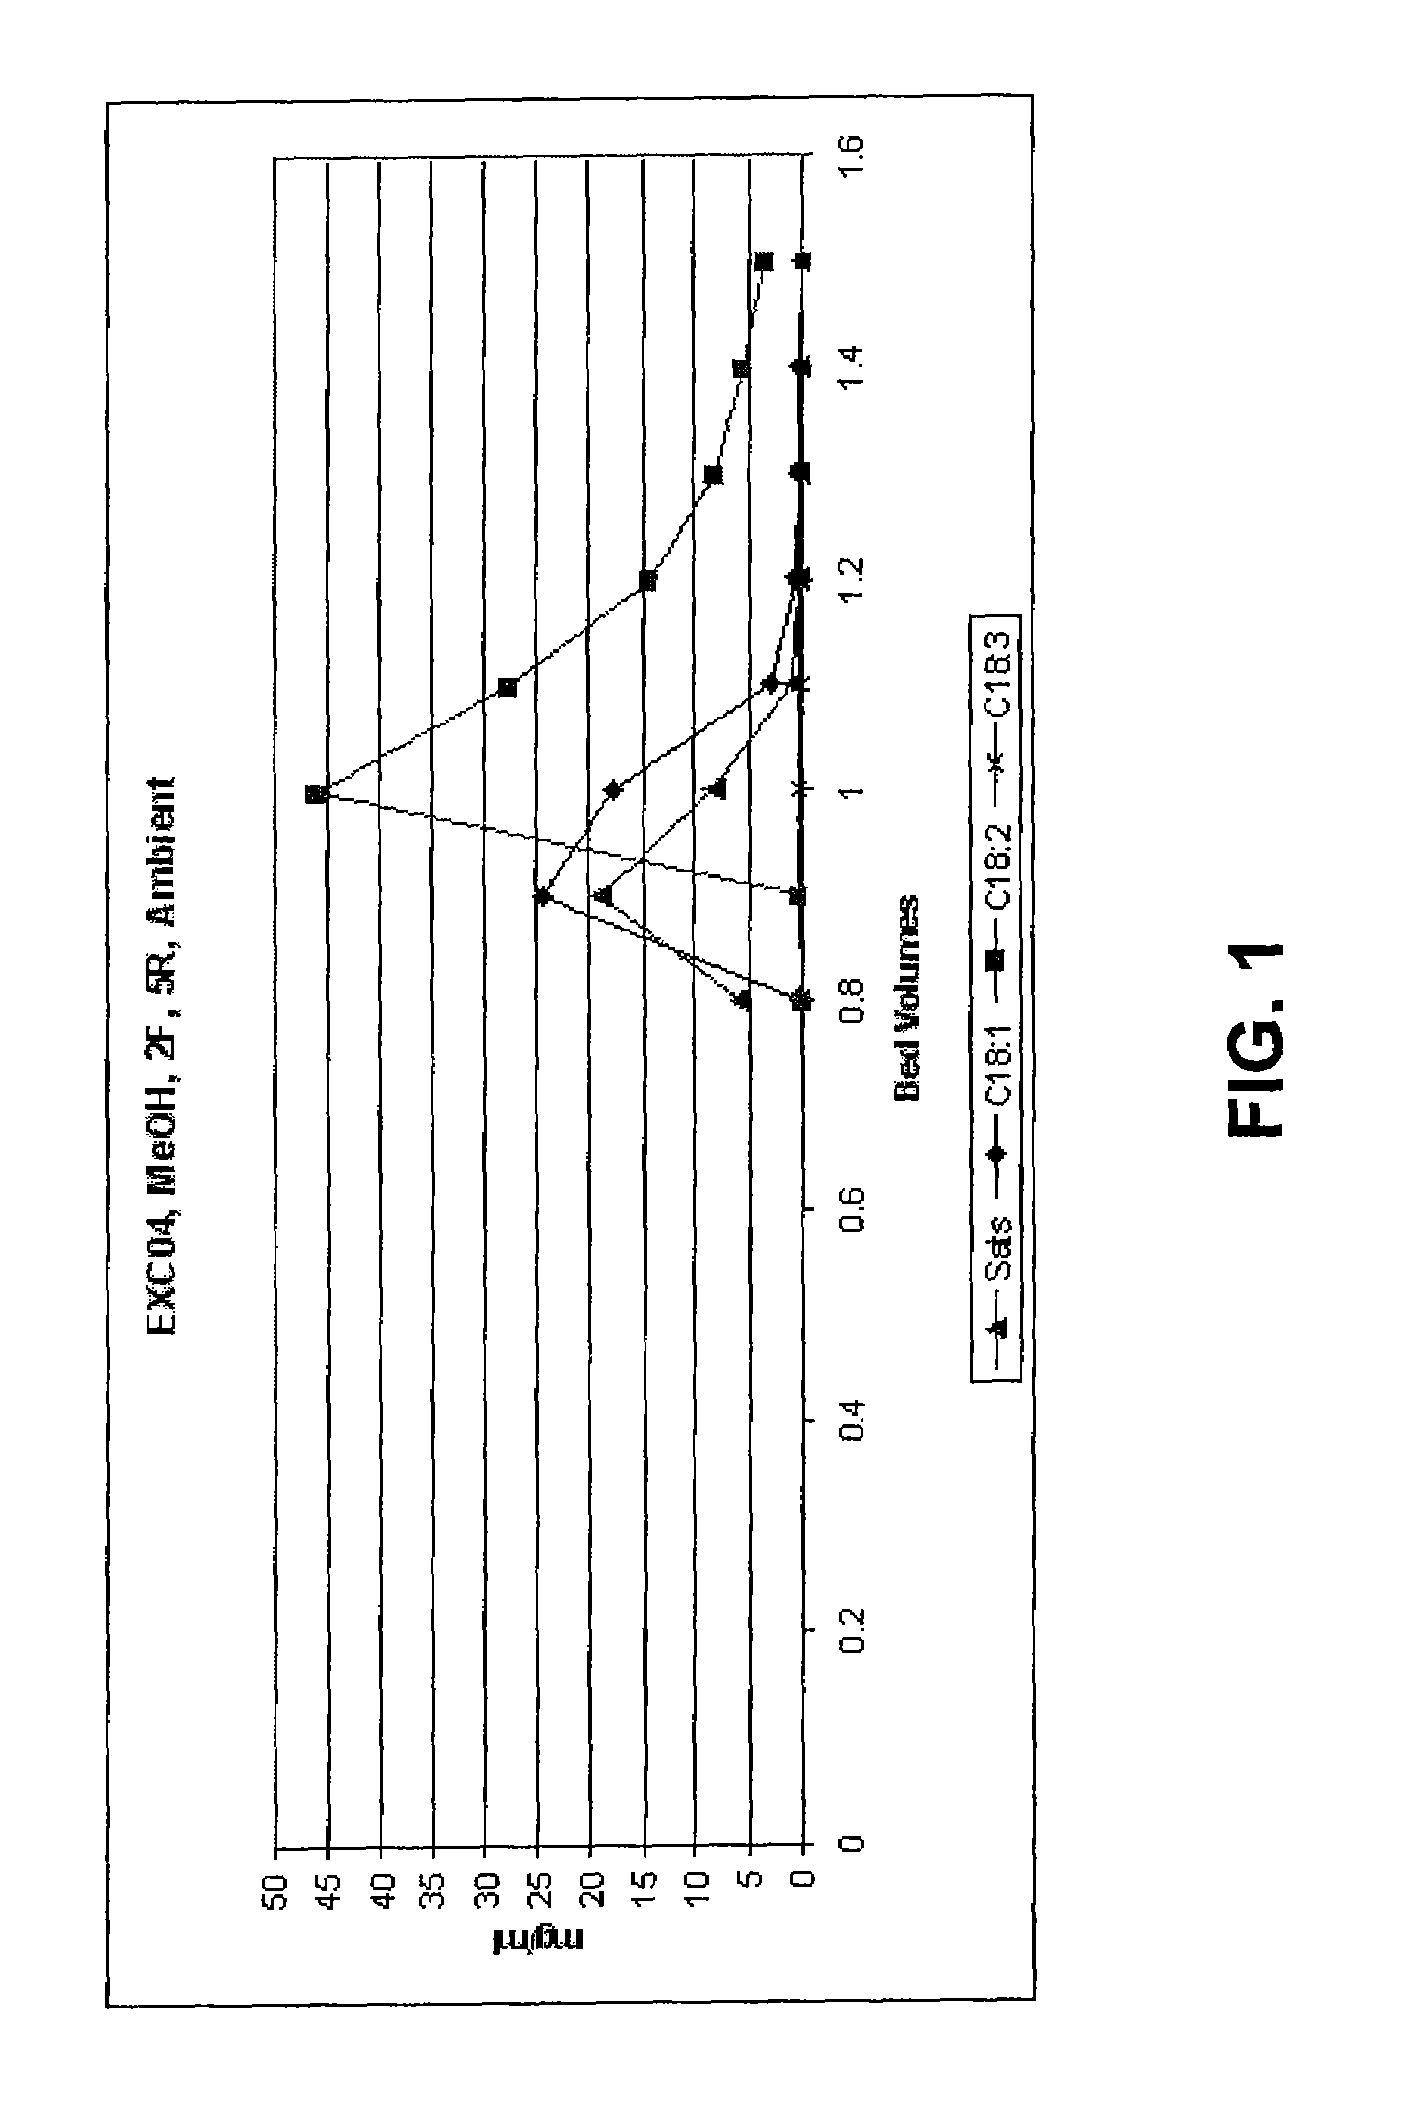 Method of preparing a composition using argentation chromatography